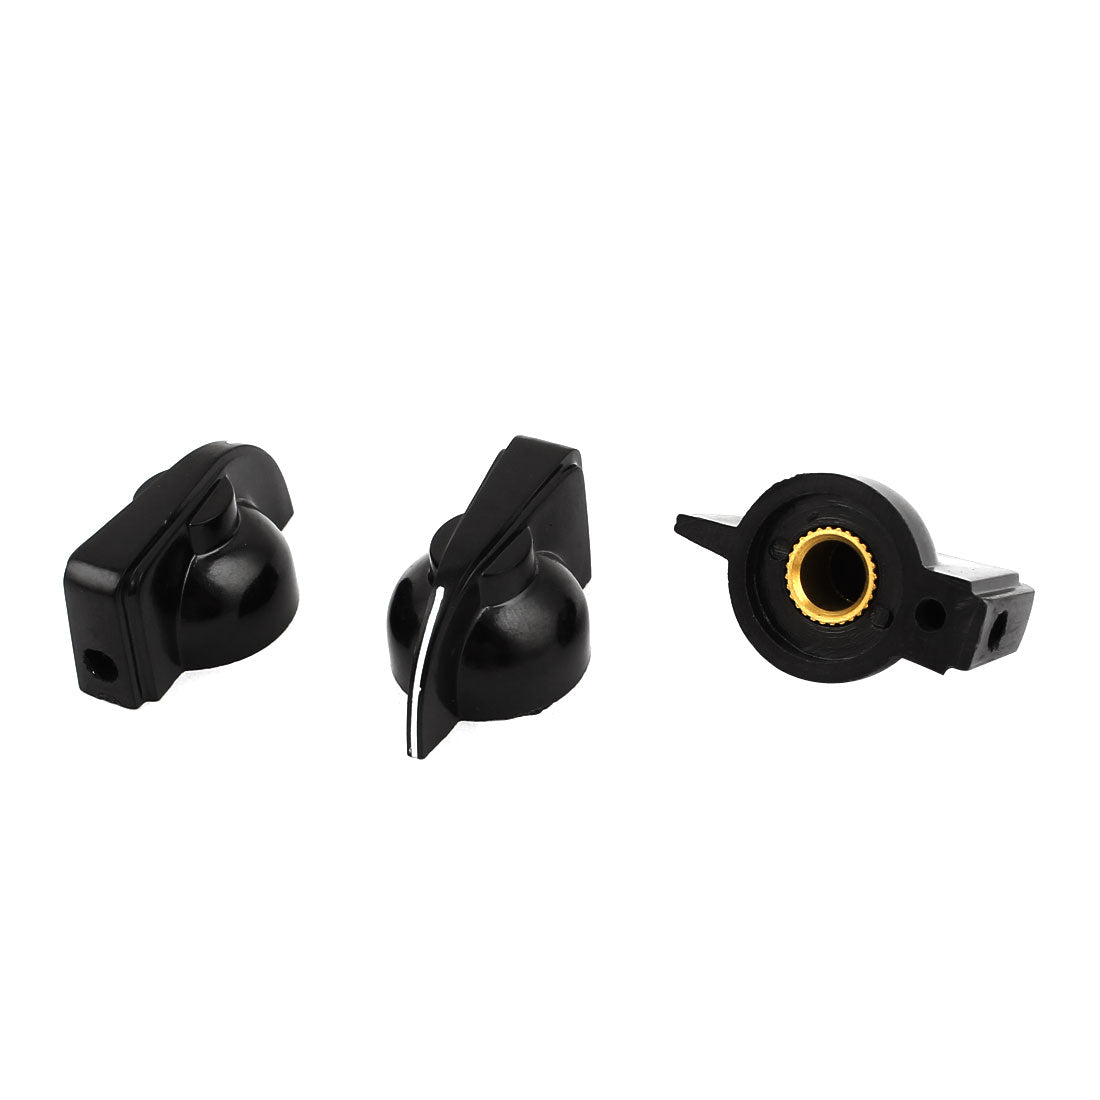 Uxcell Uxcell 3 Pcs Black Plastic Rotary Switch Knobs Cpas 6mm Dia Shaft Hole